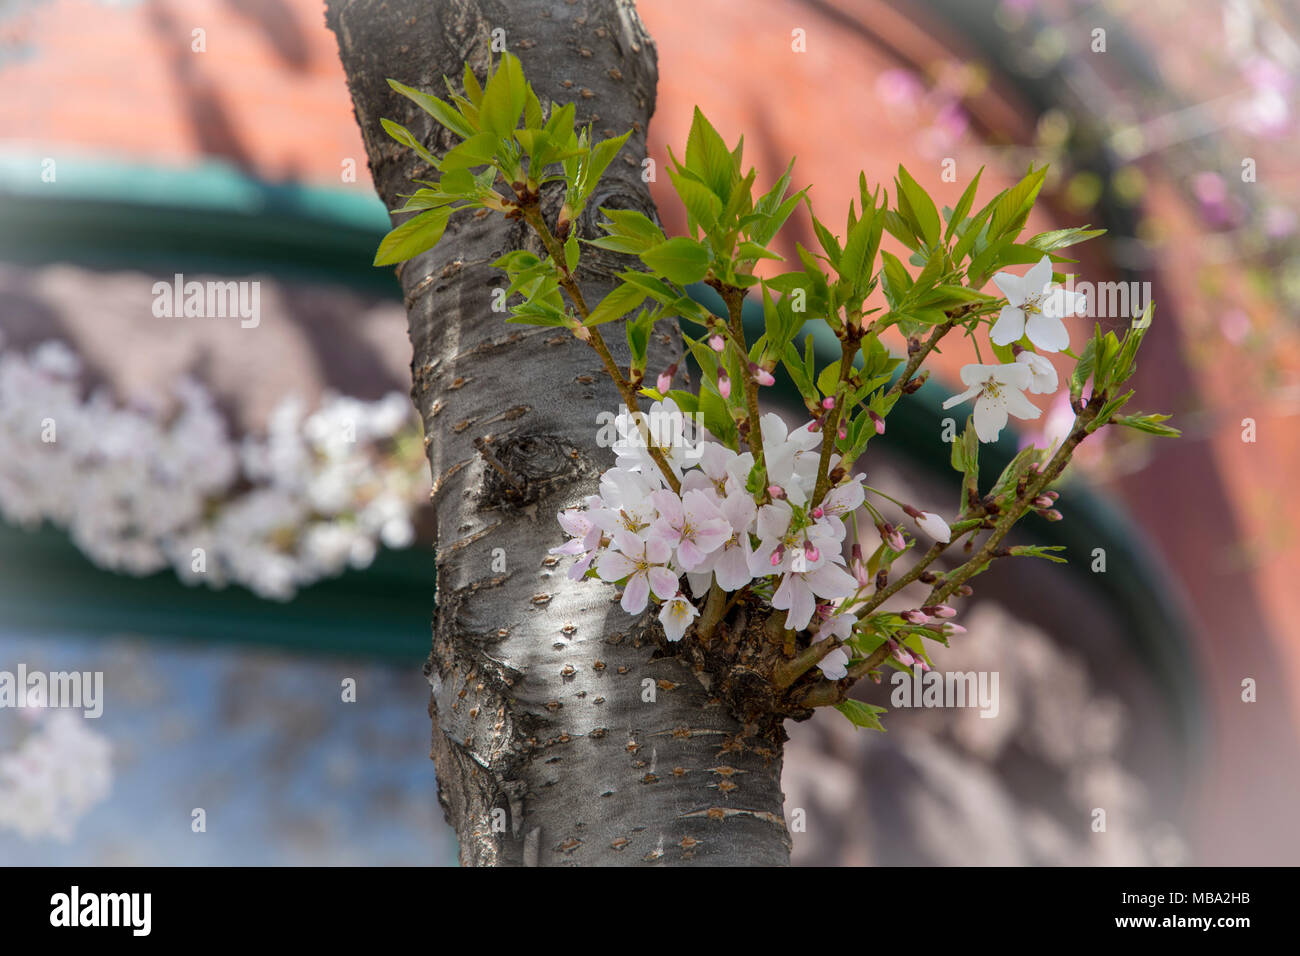 Washington, USA. 8th April, 2018, Bloosoms and branches sprout from the trunk of a cherry tree on Q Street NW in Washington, DC Credit: Tim Brown/Alamy Live News Stock Photo